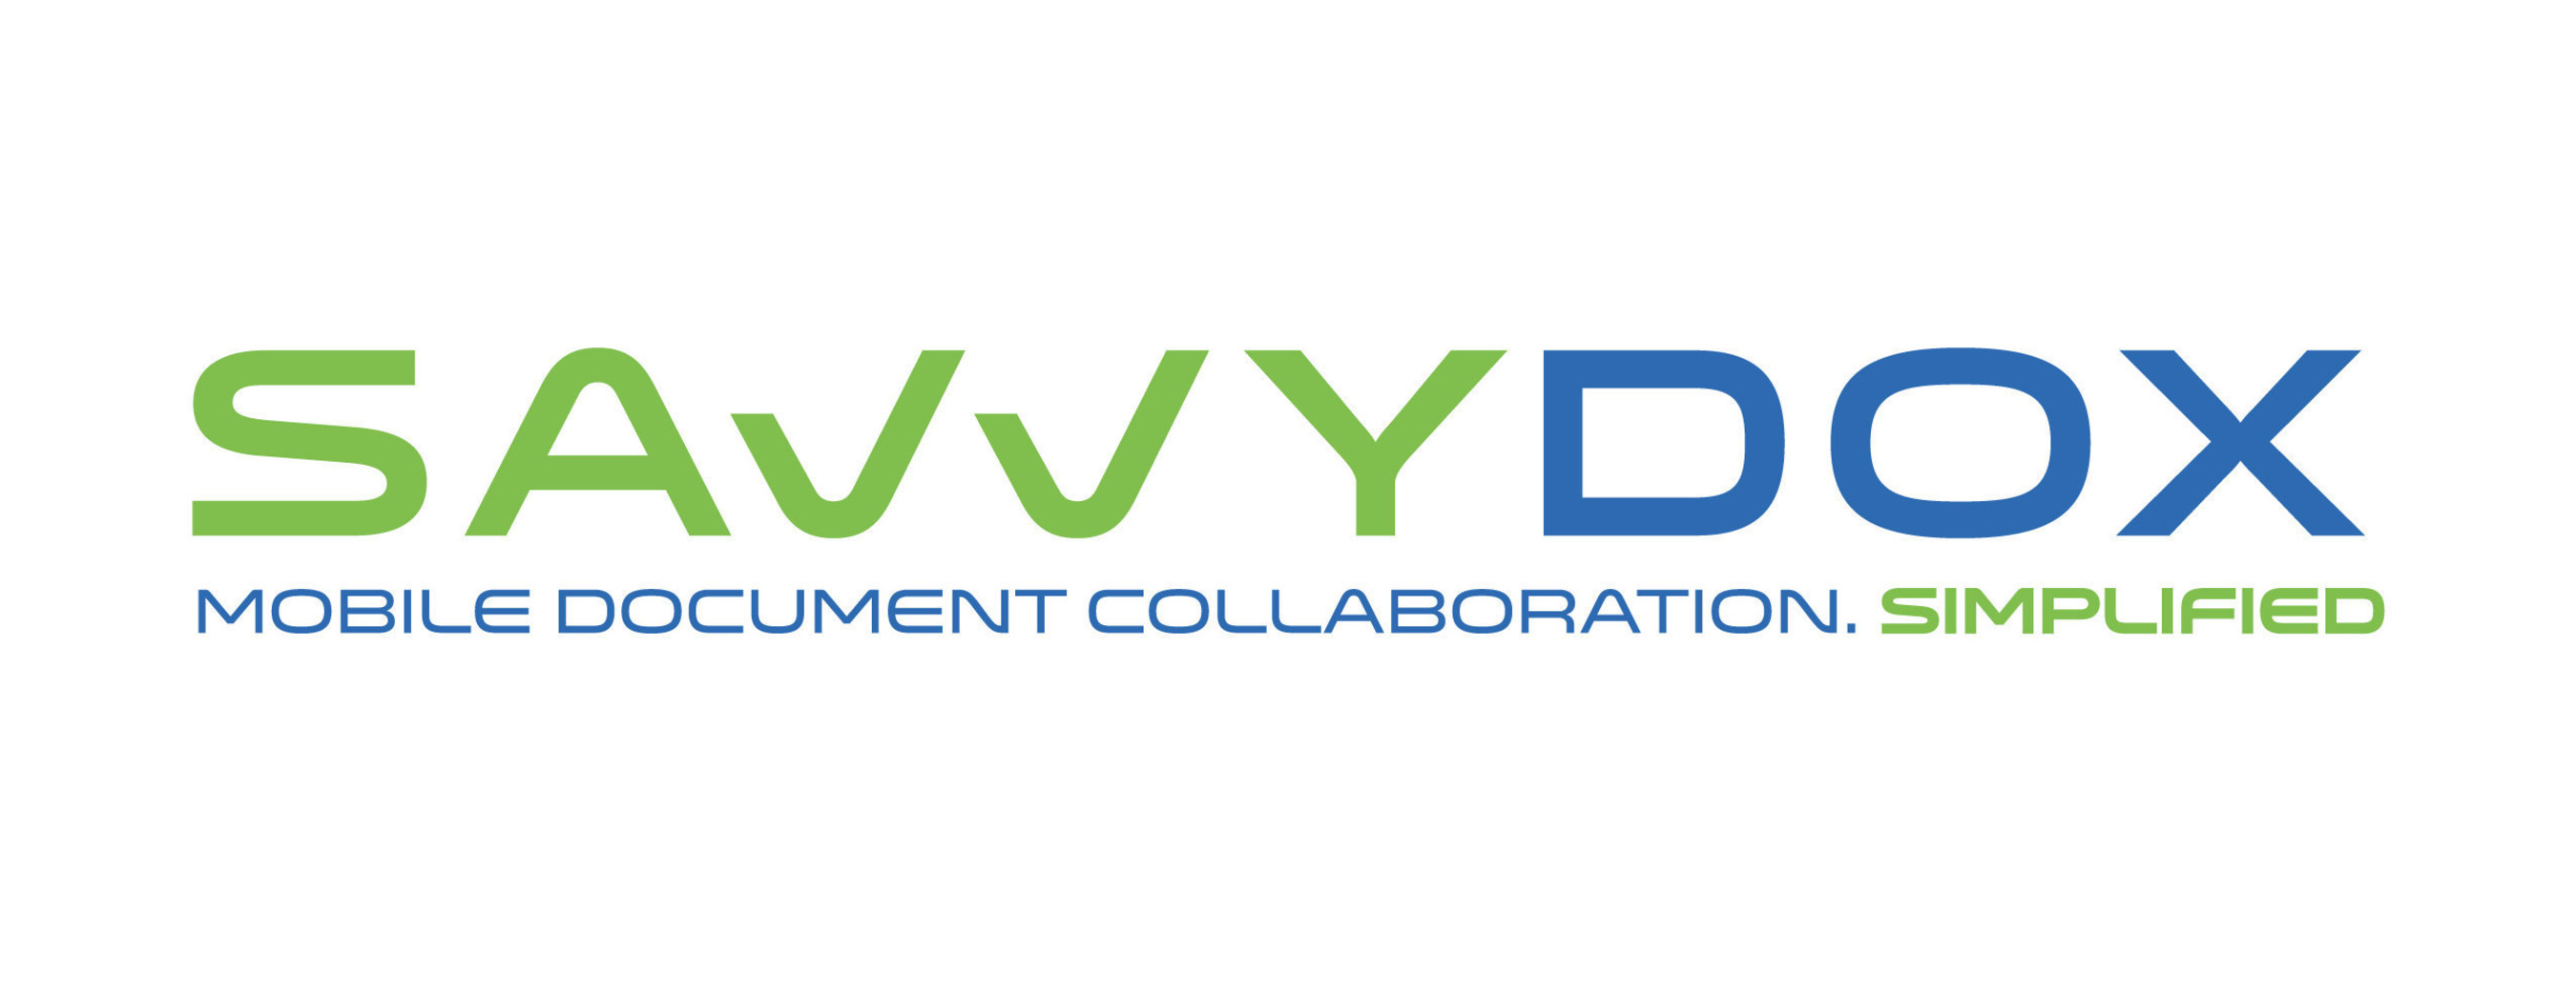 SavvyDox - the world's best document control and collaboration solution